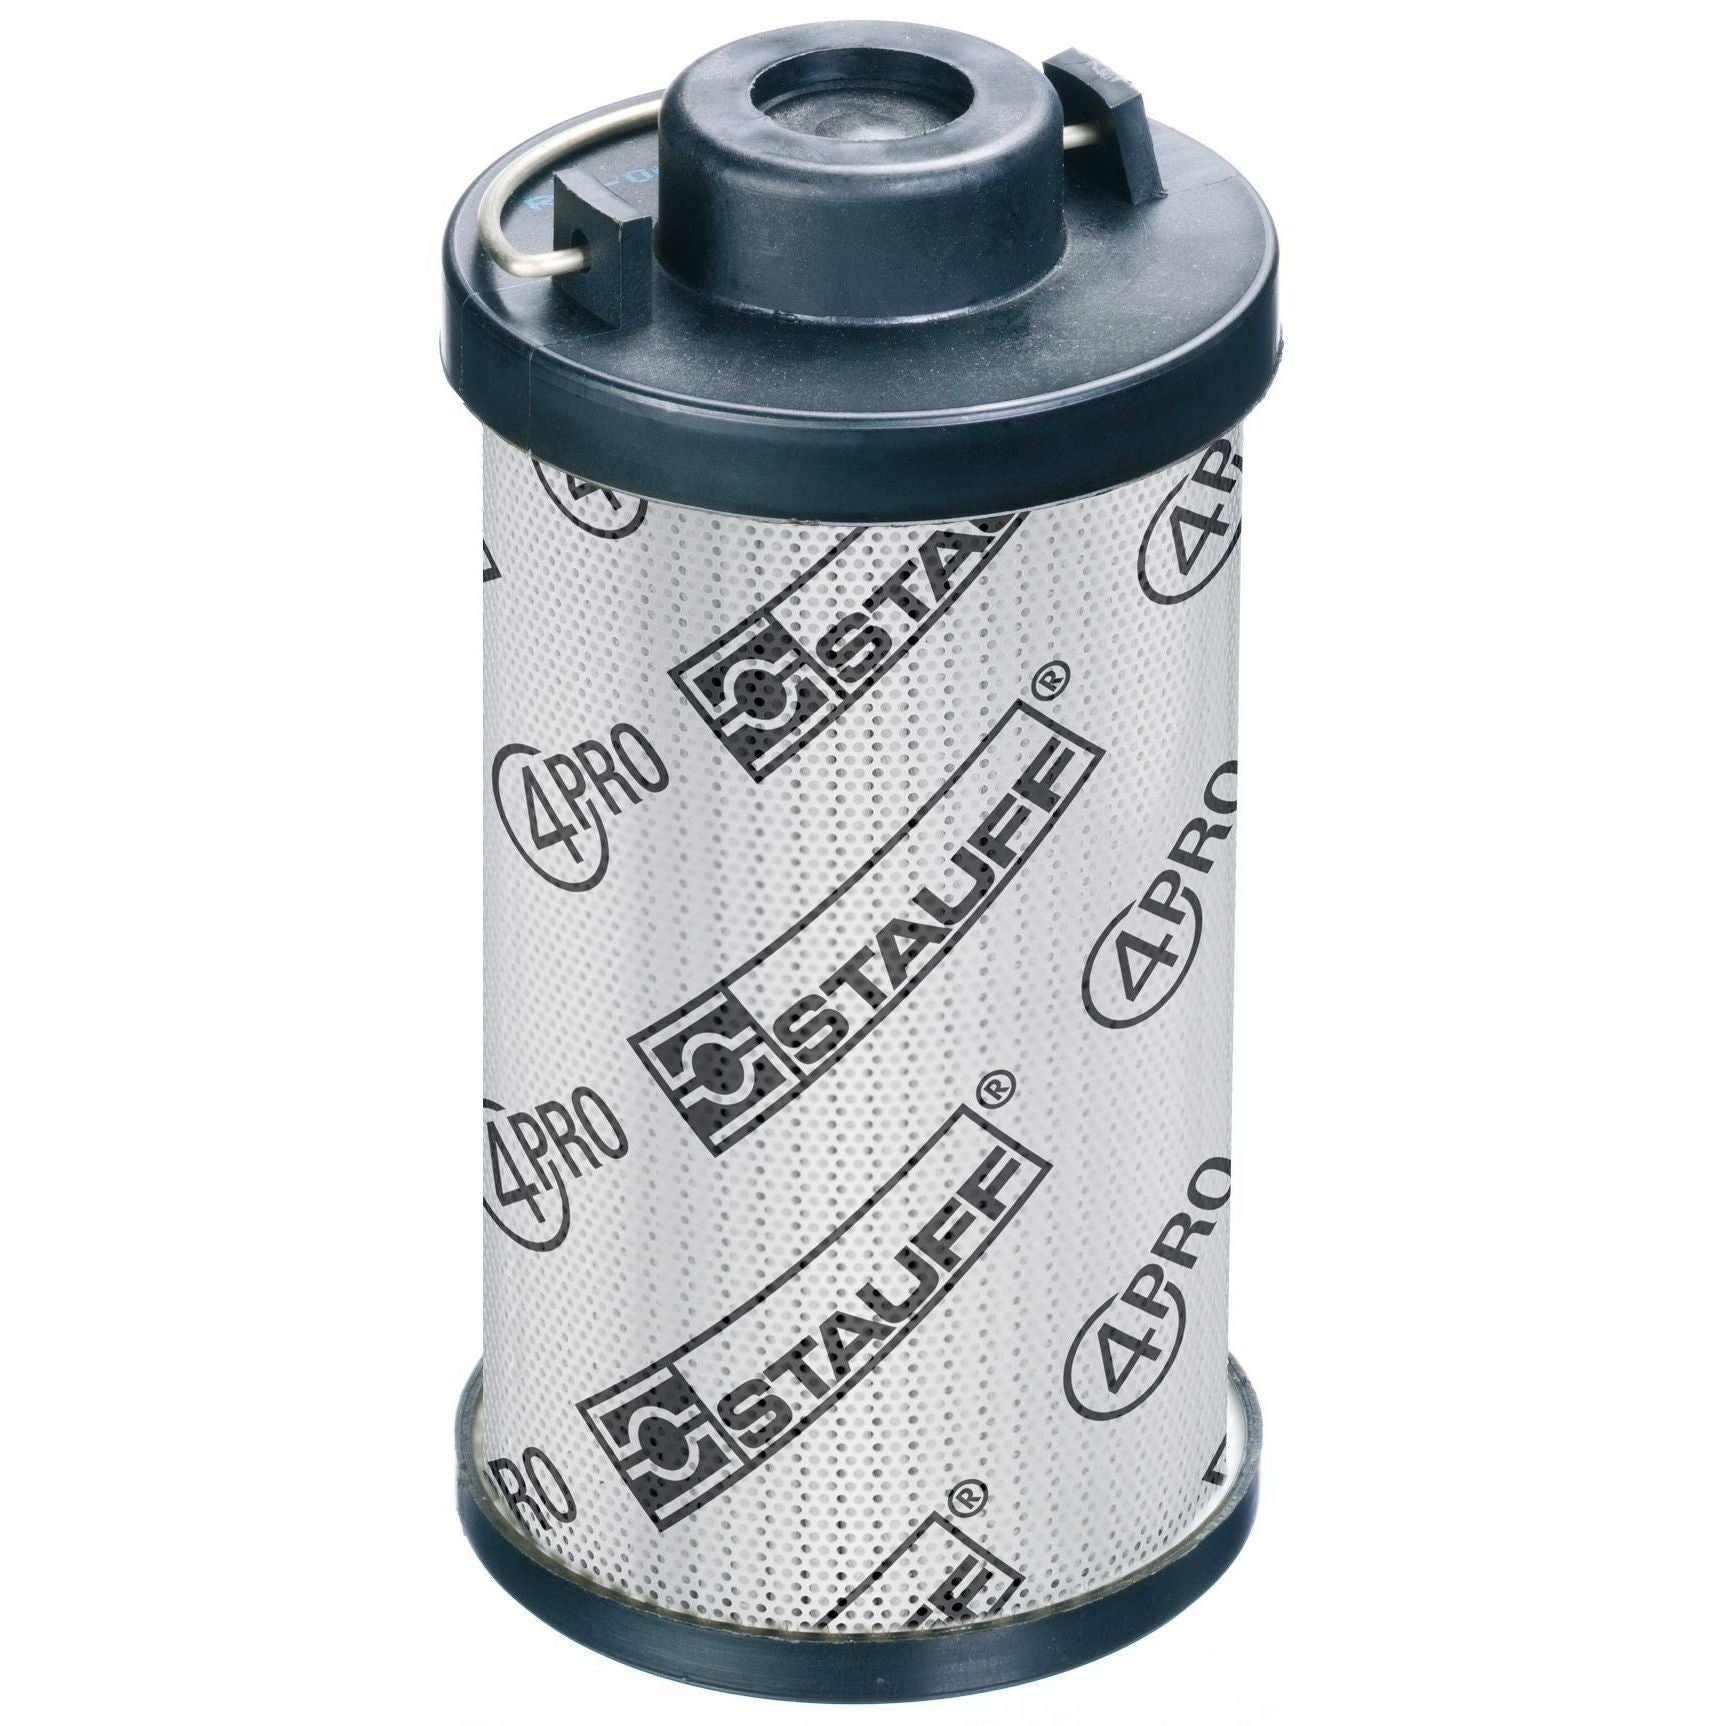 RE-250-G-03-B/4 : Stauff RF-250 Series Filter Element, 3 Micron, Synthetic, 363psi Collapse Differential, Buna